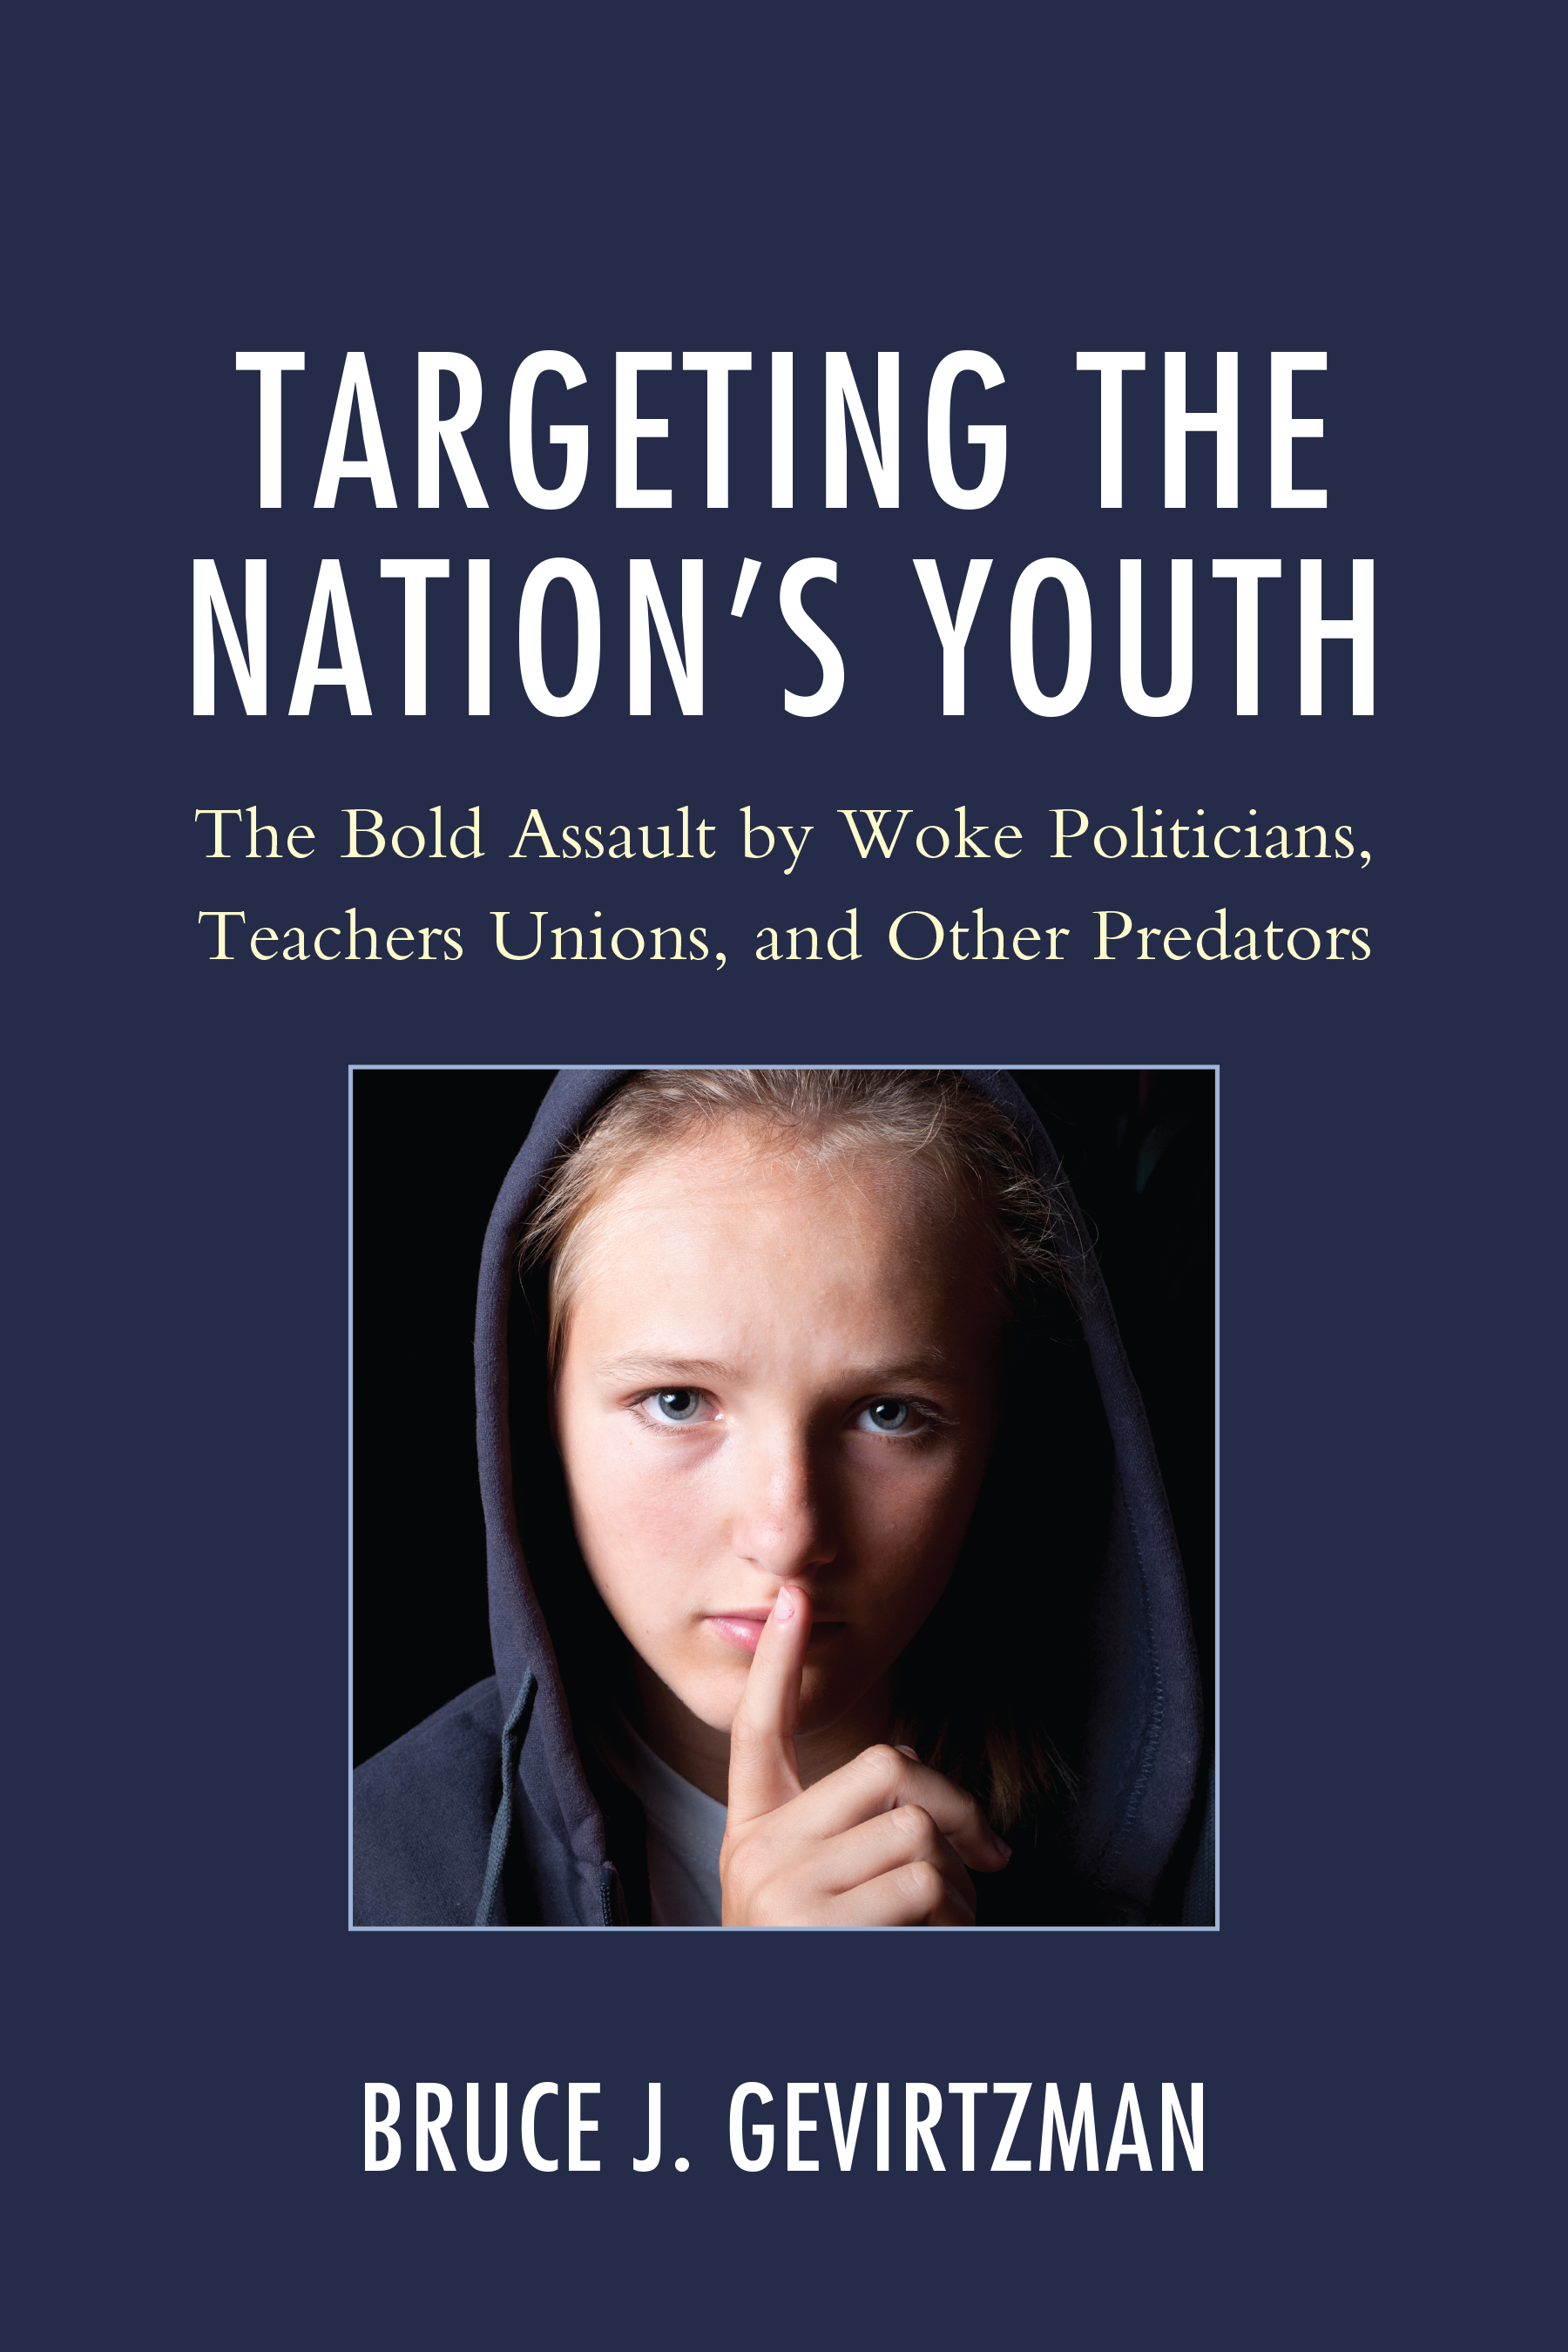 Targeting the Nation's Youth: The Bold Assault by Woke Politicians, Teachers Unions, and Other Predators